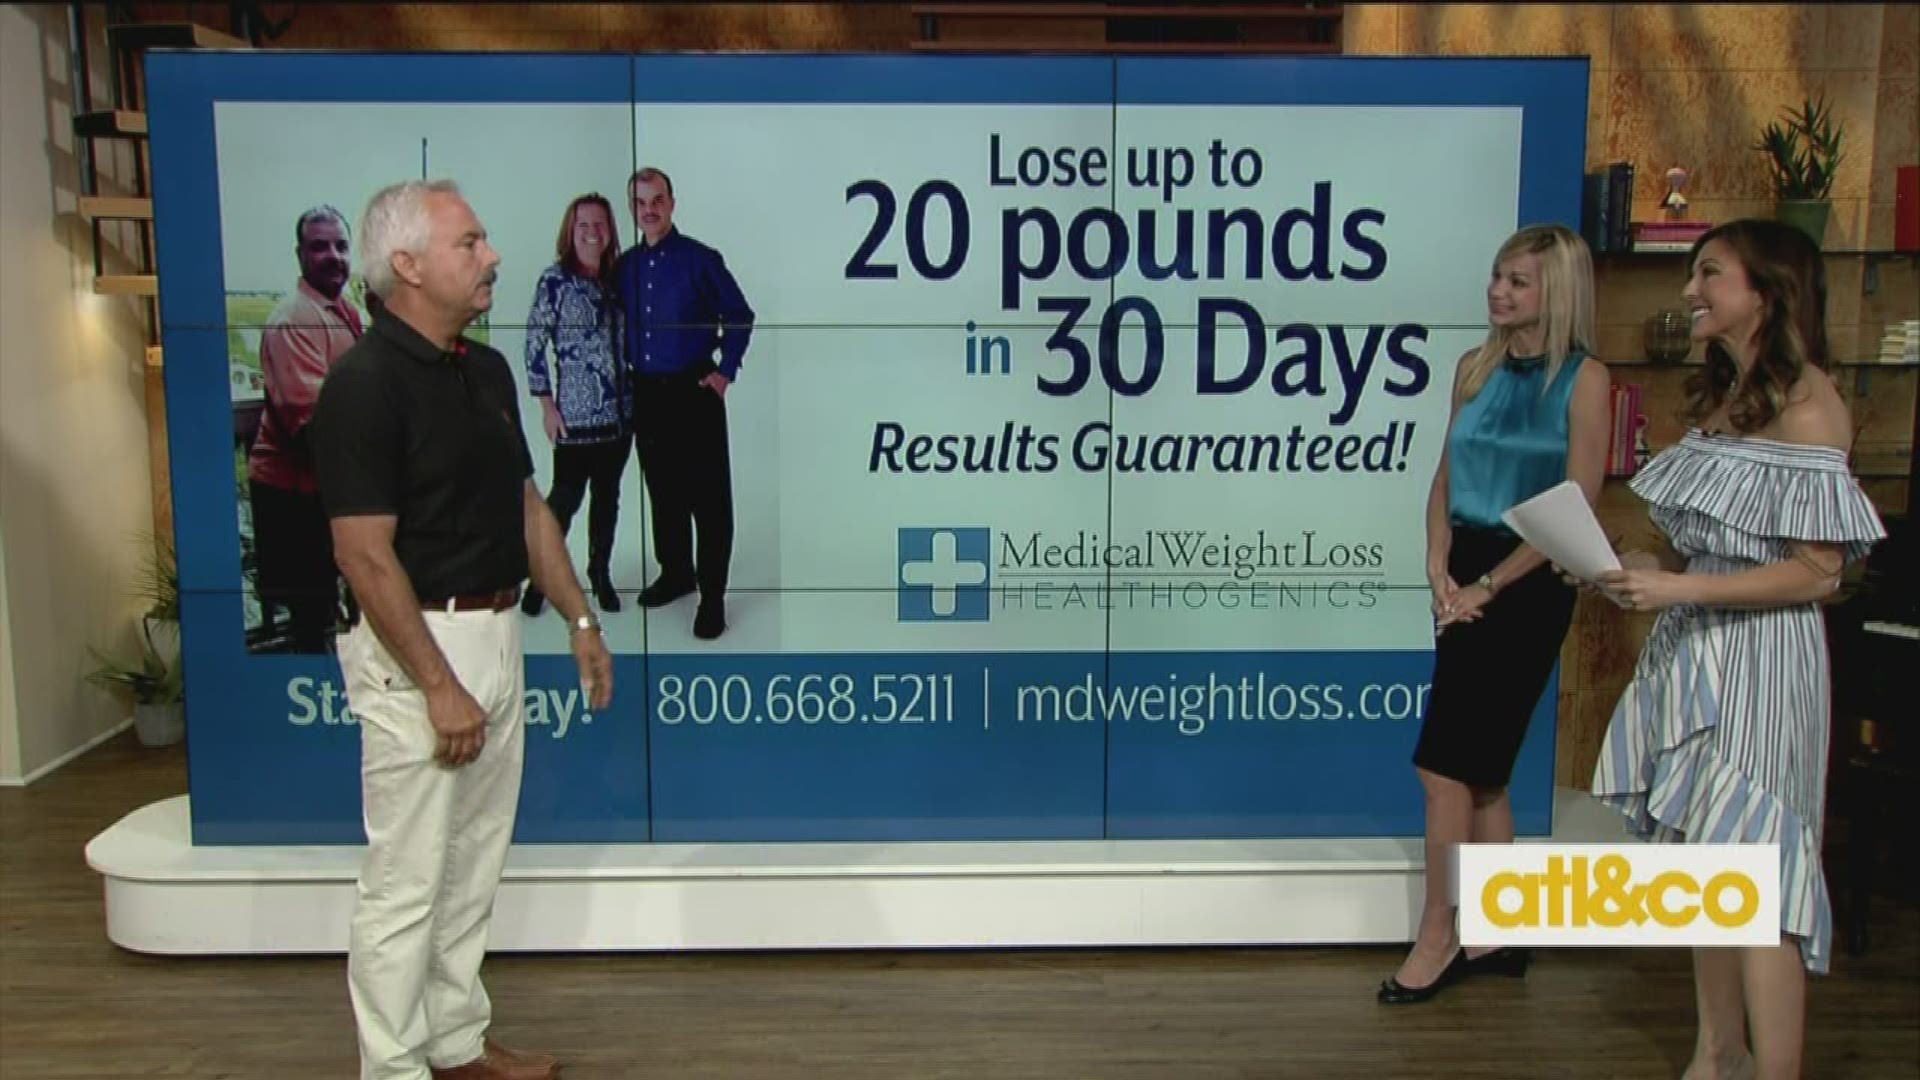 Start your weight loss journey with a great offer from Medical Weight Loss by Healthogenics!